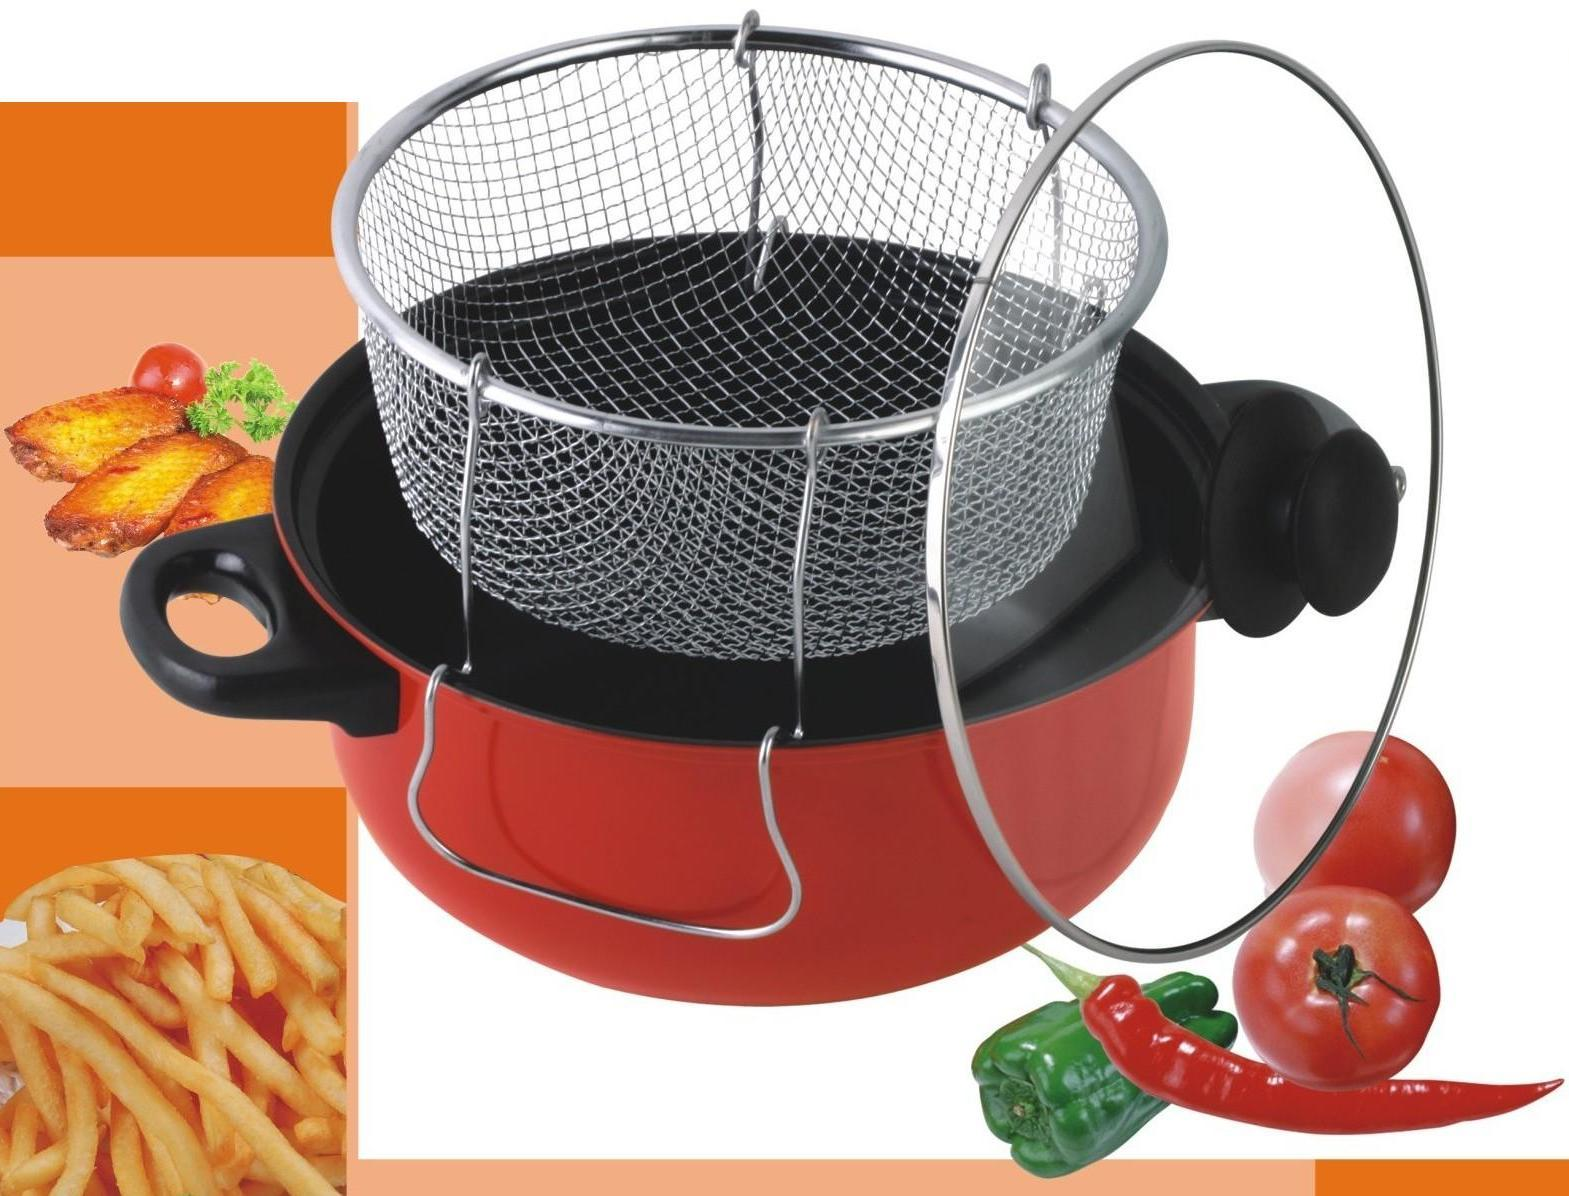 Jl-5303r Gourmet Chef 4.5 Qt. Non Stick Deep Fryer With Frying Basket & Glass Cover. Red